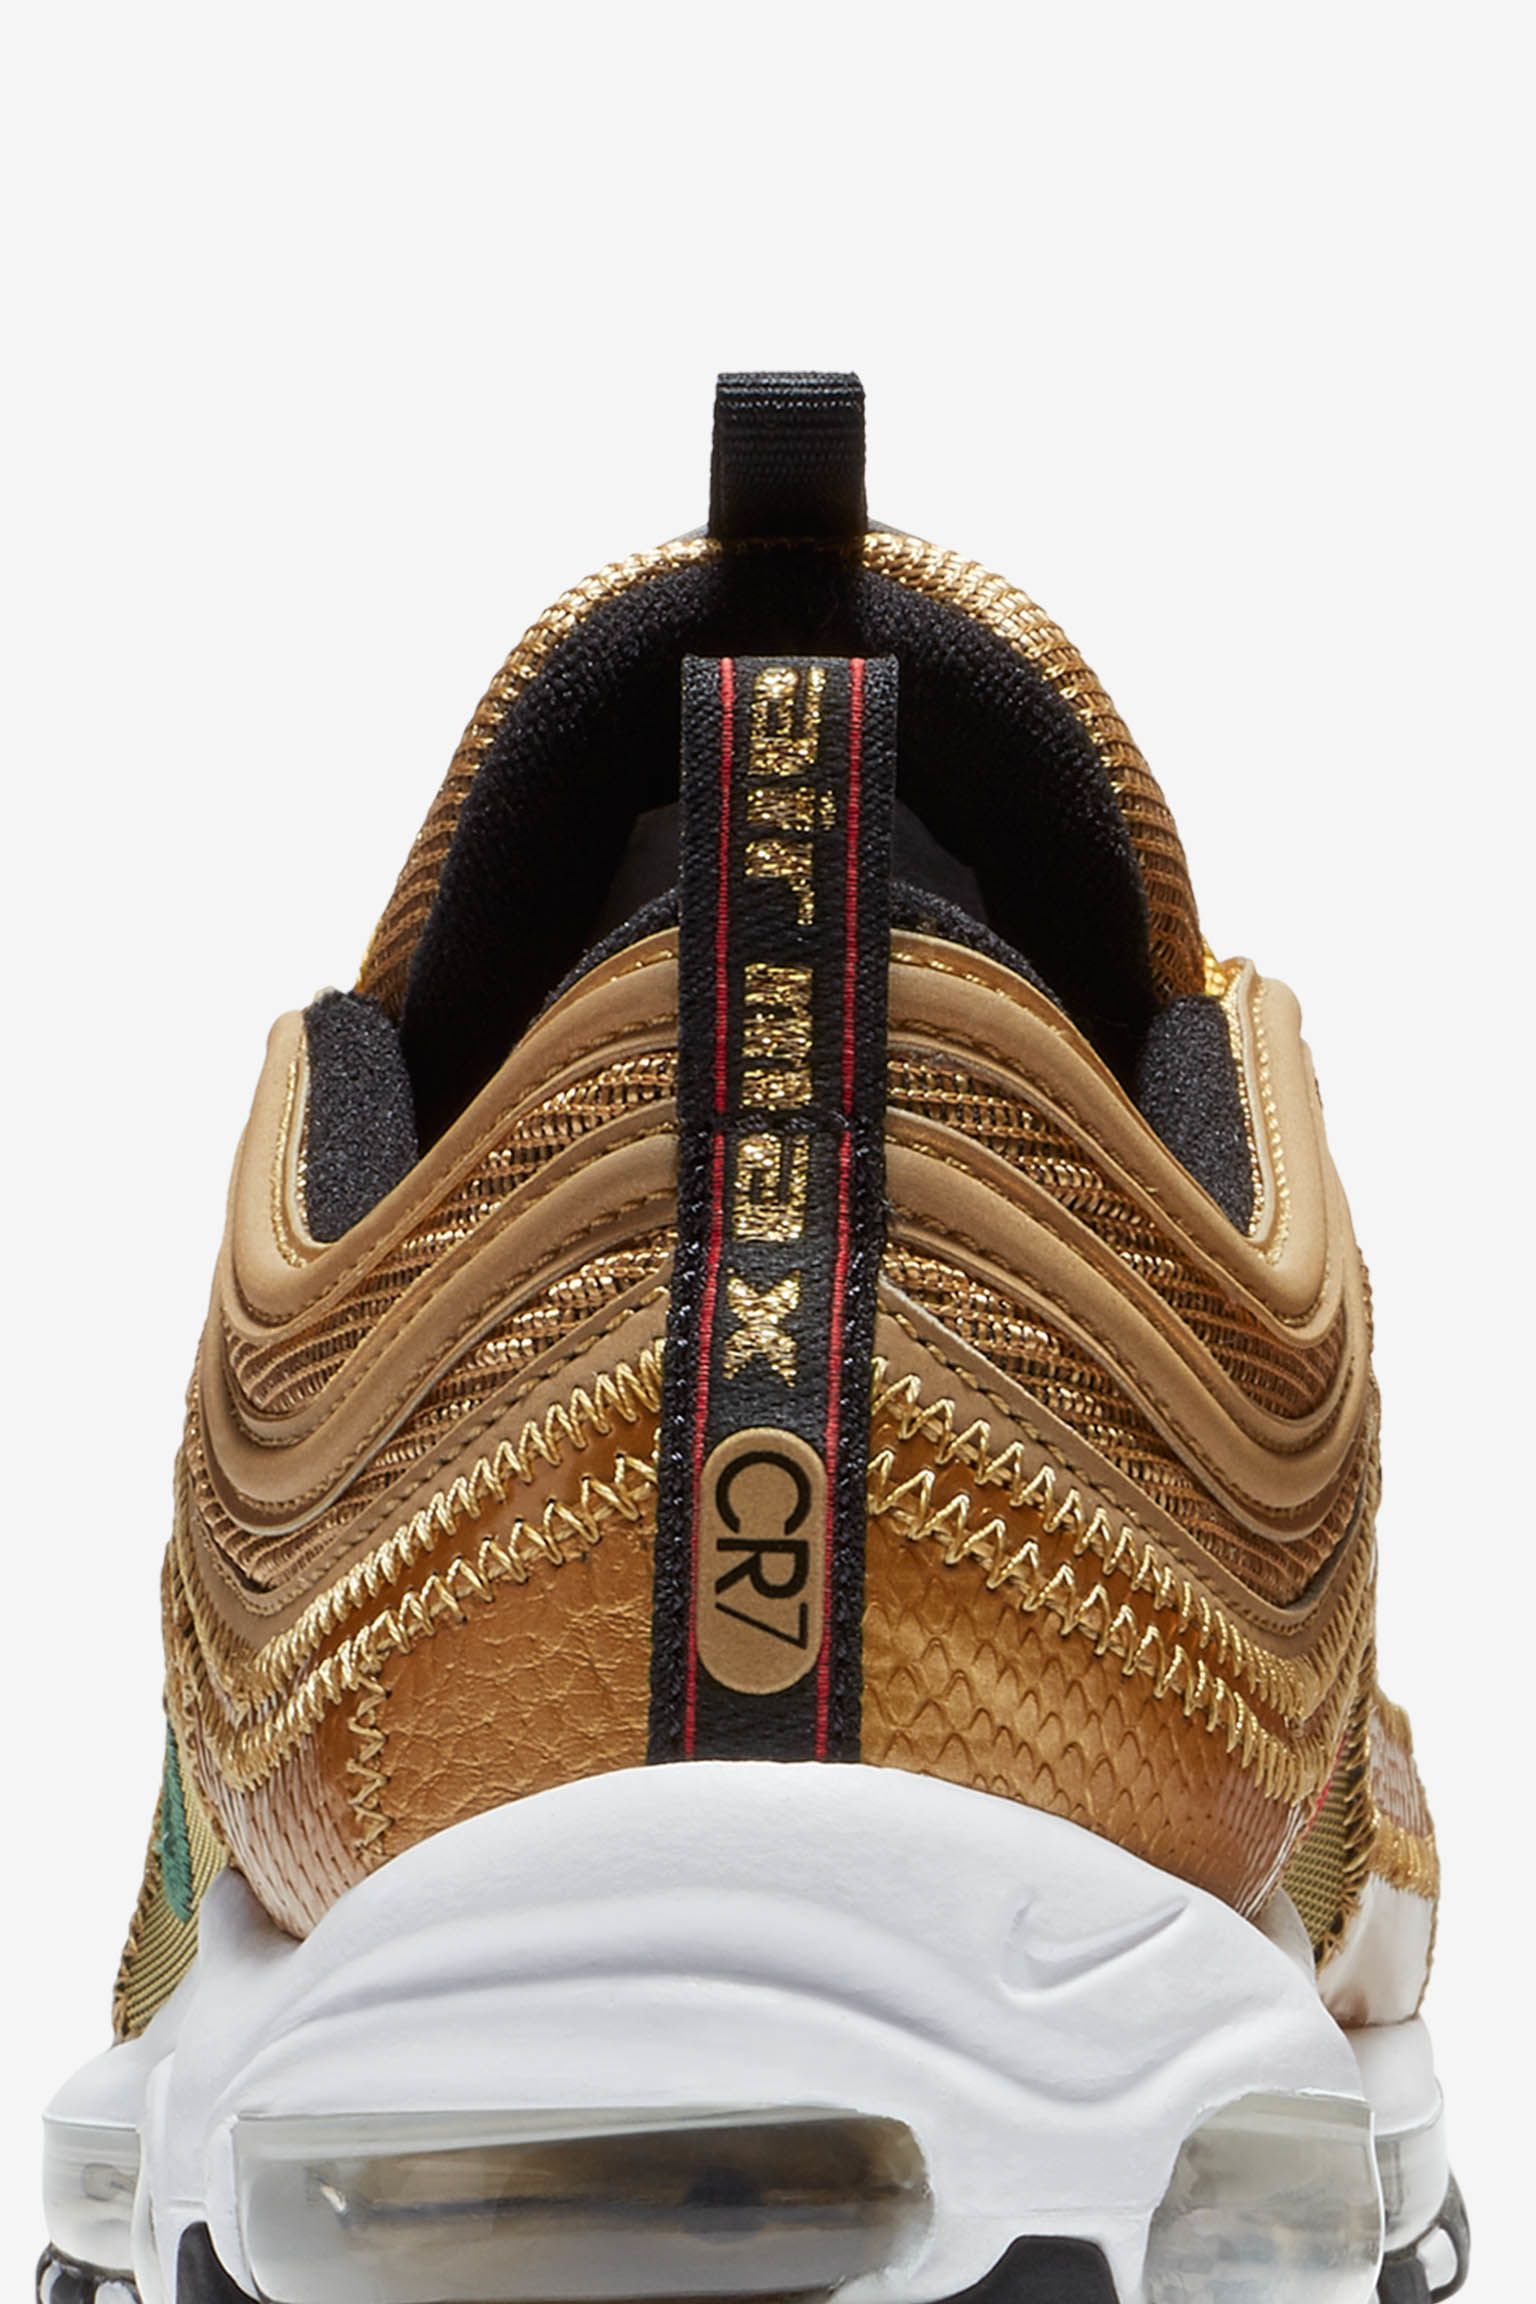 Nike Air Max 97 CR7 'Golden Patchwork' Release Date. Nike SNKRS GB